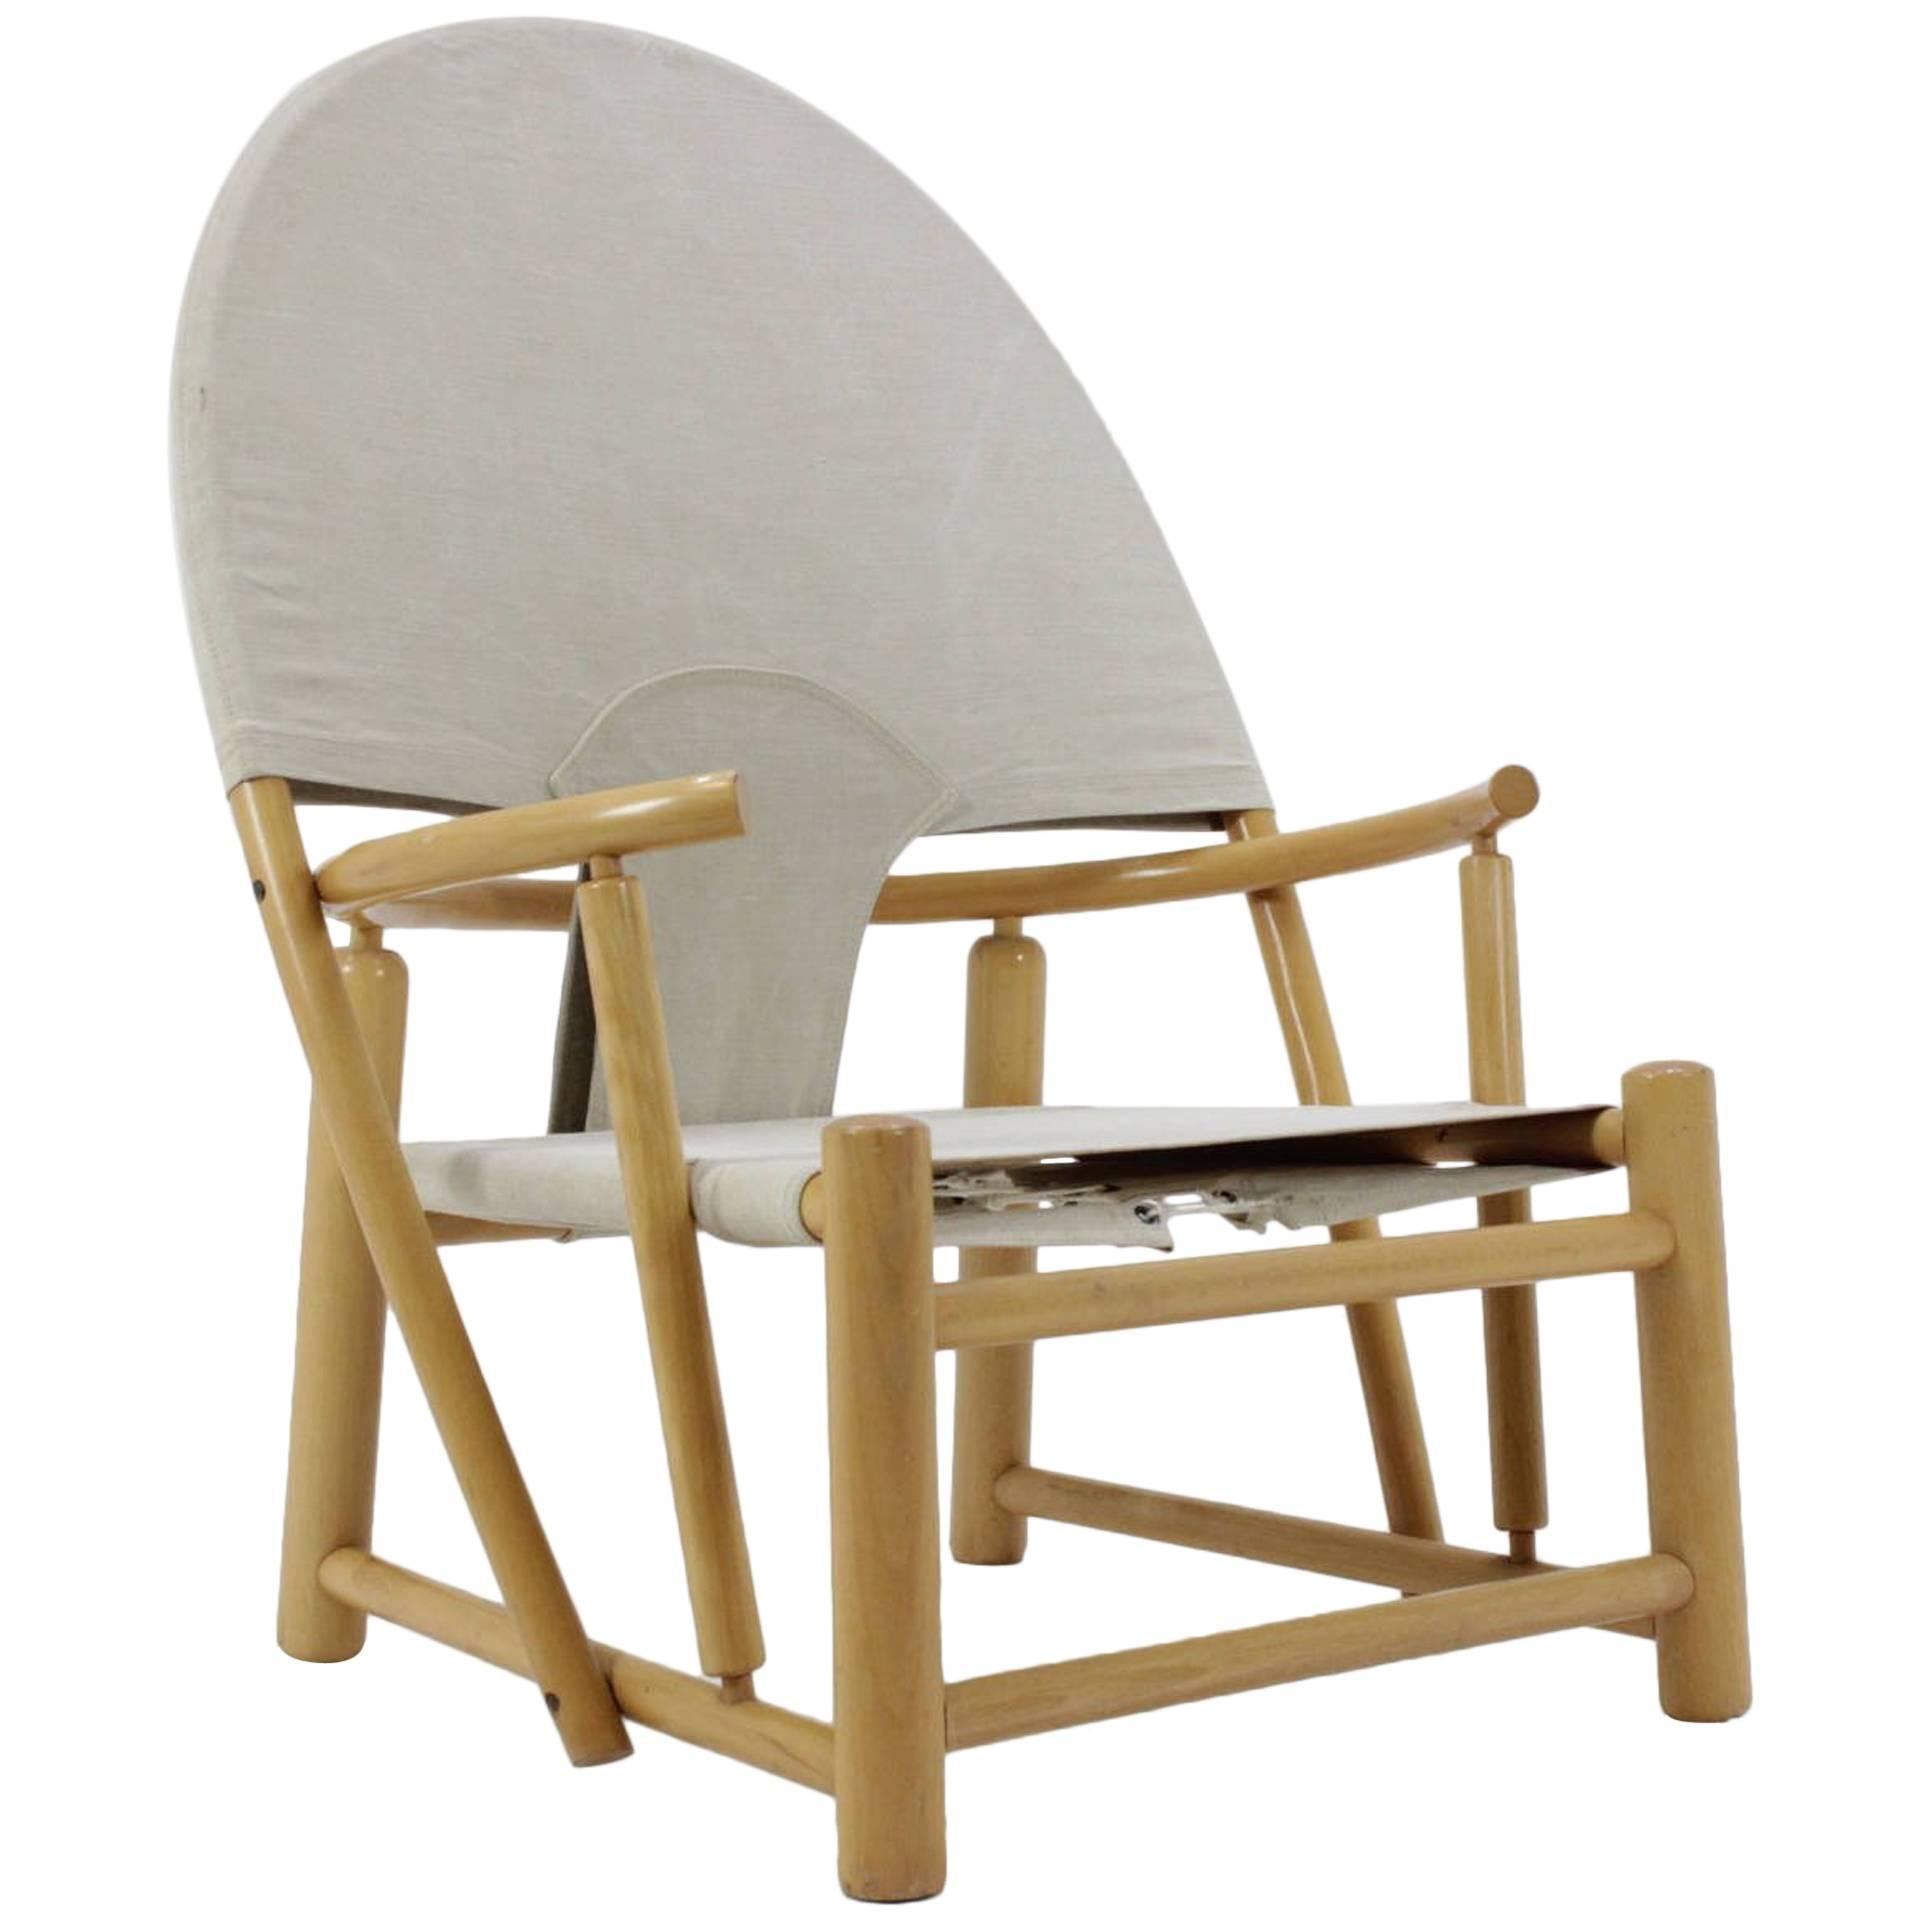 Piero Palange and Werther Toffoloni Lounge "Hoop" Chair G23 for Germa